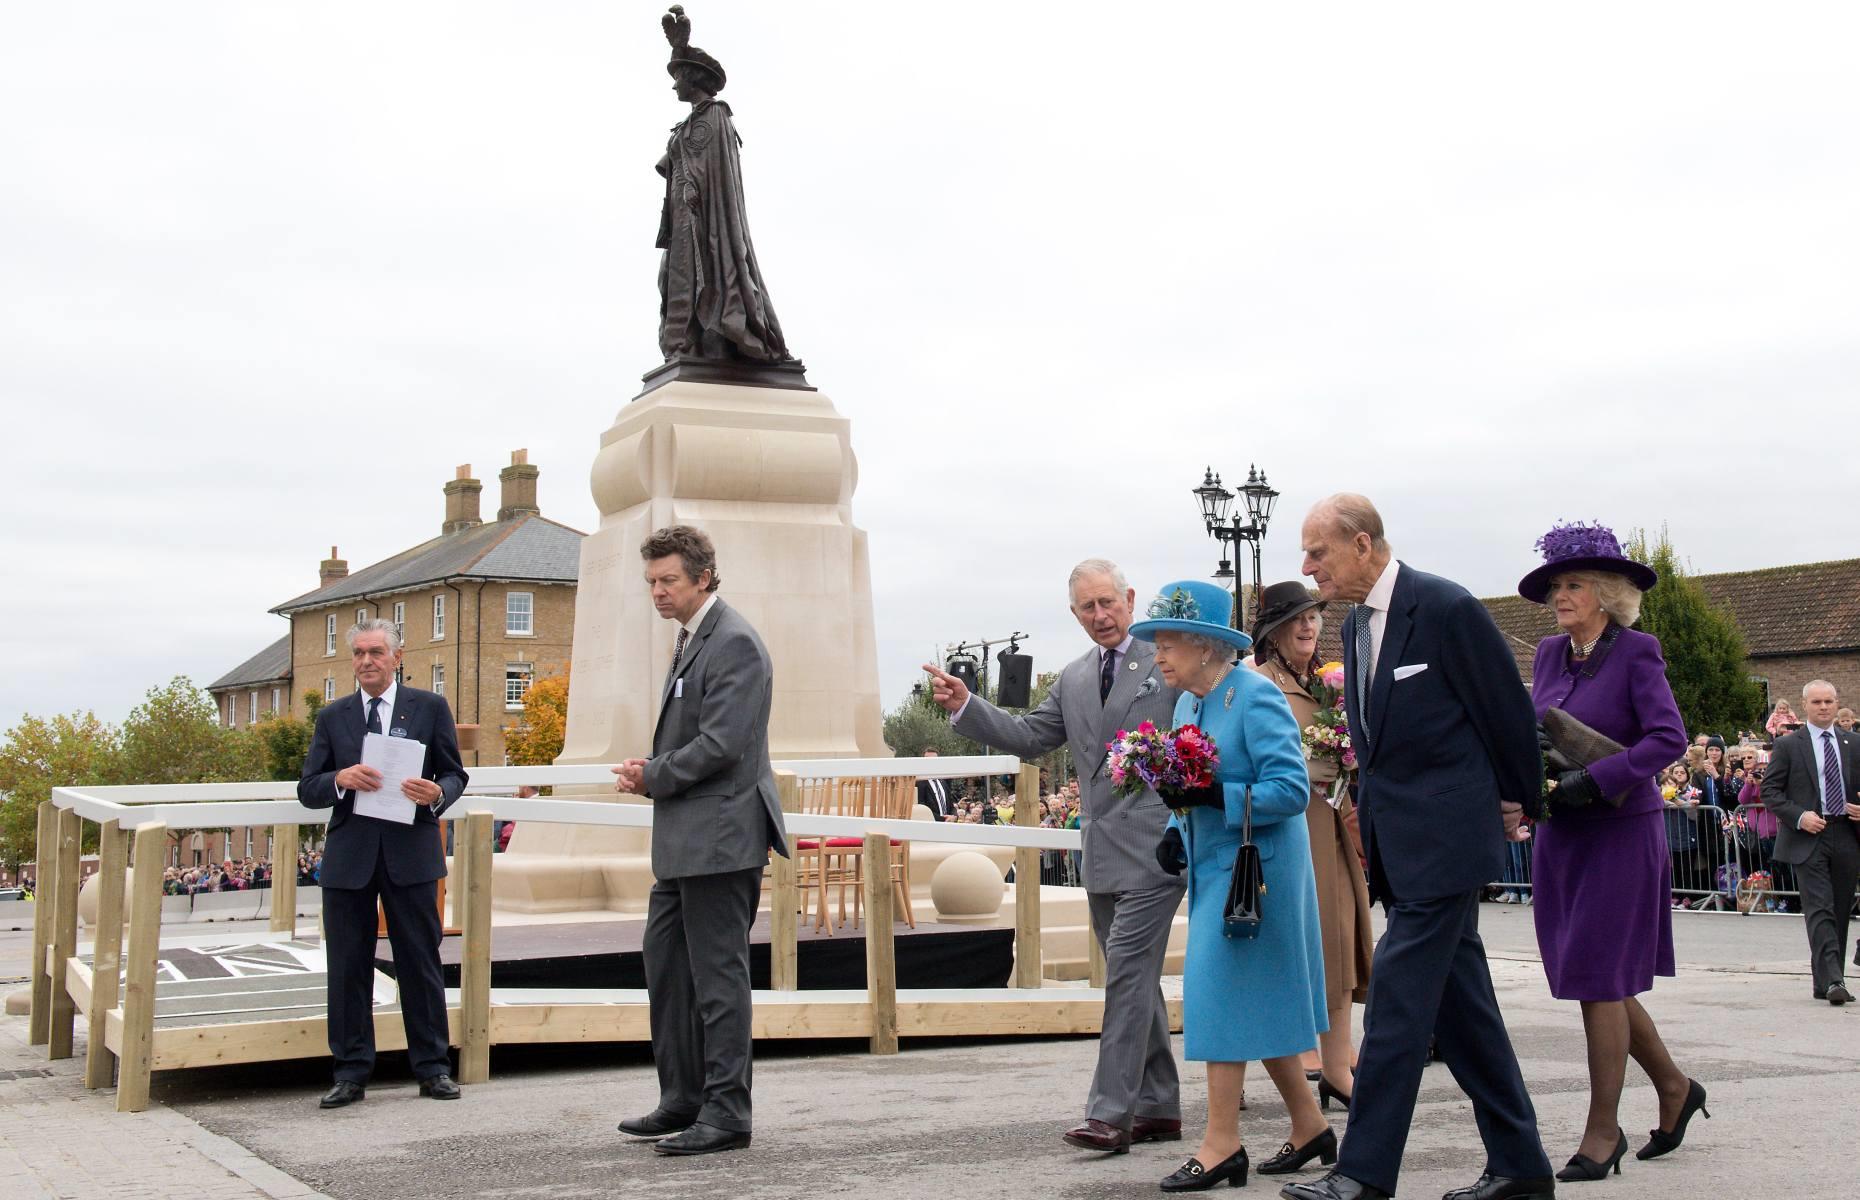 <p>In 1988, he commissioned the visionary urban theorist <a href="https://www.theguardian.com/artanddesign/2011/jun/24/prince-charles-influence-architecture-poundbury">Leon Krier</a> (standing to the left of the King in this image) to produce a plan for developing Poundbury. His brief was to create an autonomous extension to the nearby town of Dorchester blending in with traditional <a href="https://www.loveproperty.com/news/76639/dreamy-dorset-homes-for-sale-right-now">Dorset </a>architecture, using the urban design principles described in <em>A Vision of Britain.</em> The overall design reflects a traditional English village with a mix of residential, commercial and retail spaces, all within easy walking distance.</p>